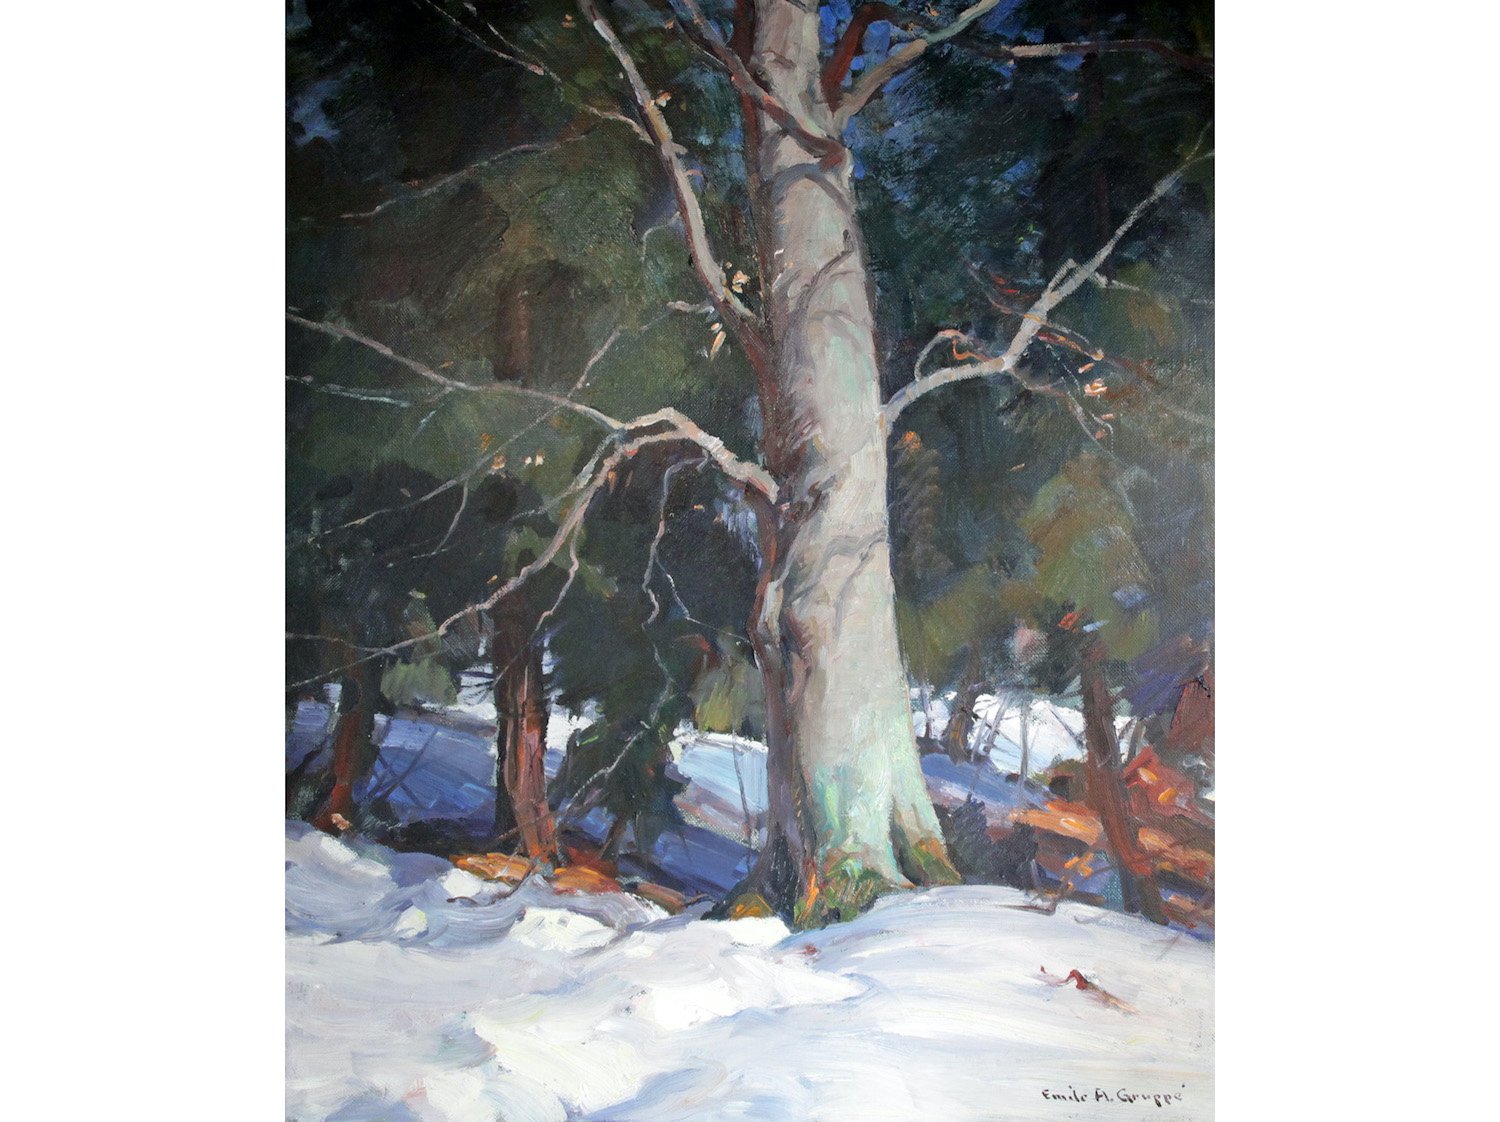  Last Year’s Feature Consignment:   Lot 138 (2023) -  Emile Gruppé (1896-1978)    Beech Tree in Winter  oil on canvas, 36 x 30 in. 